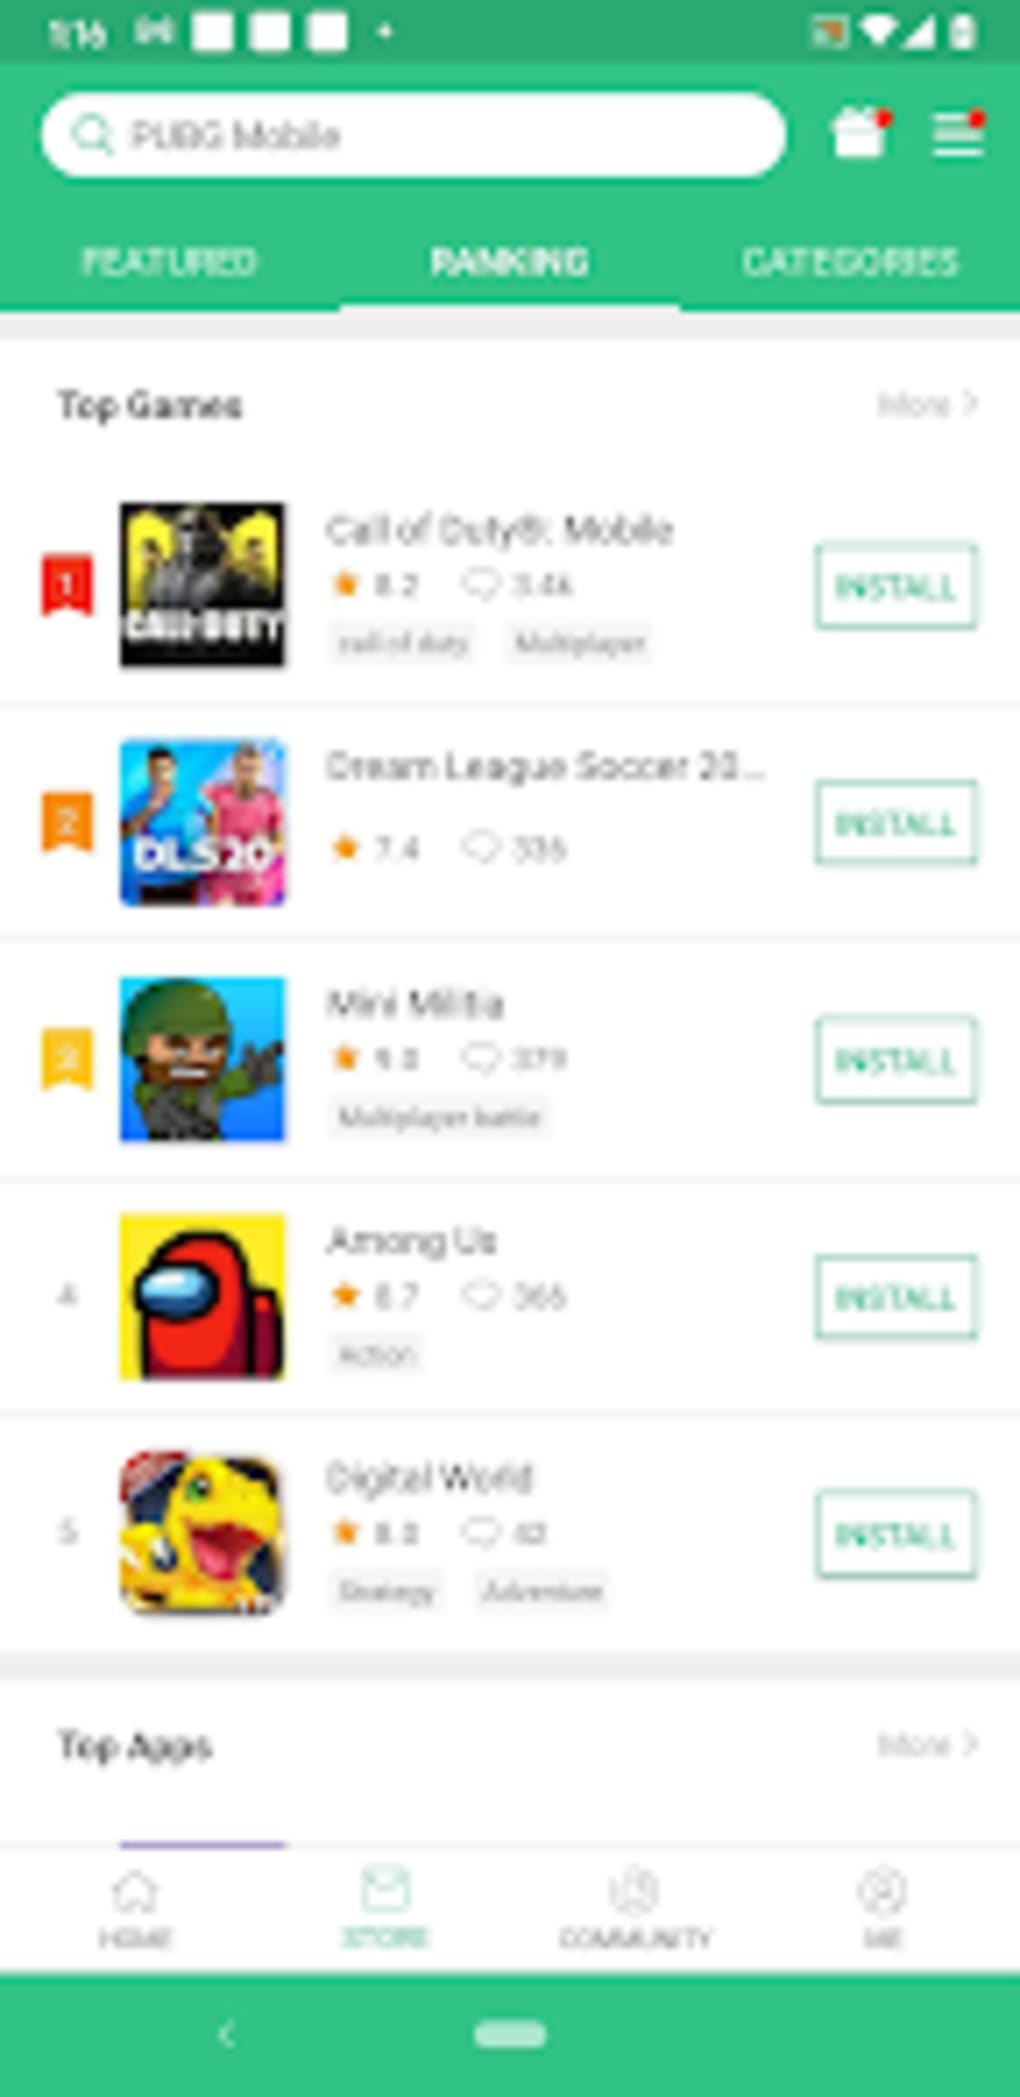 APK Download - Apps and Games – Apps no Google Play